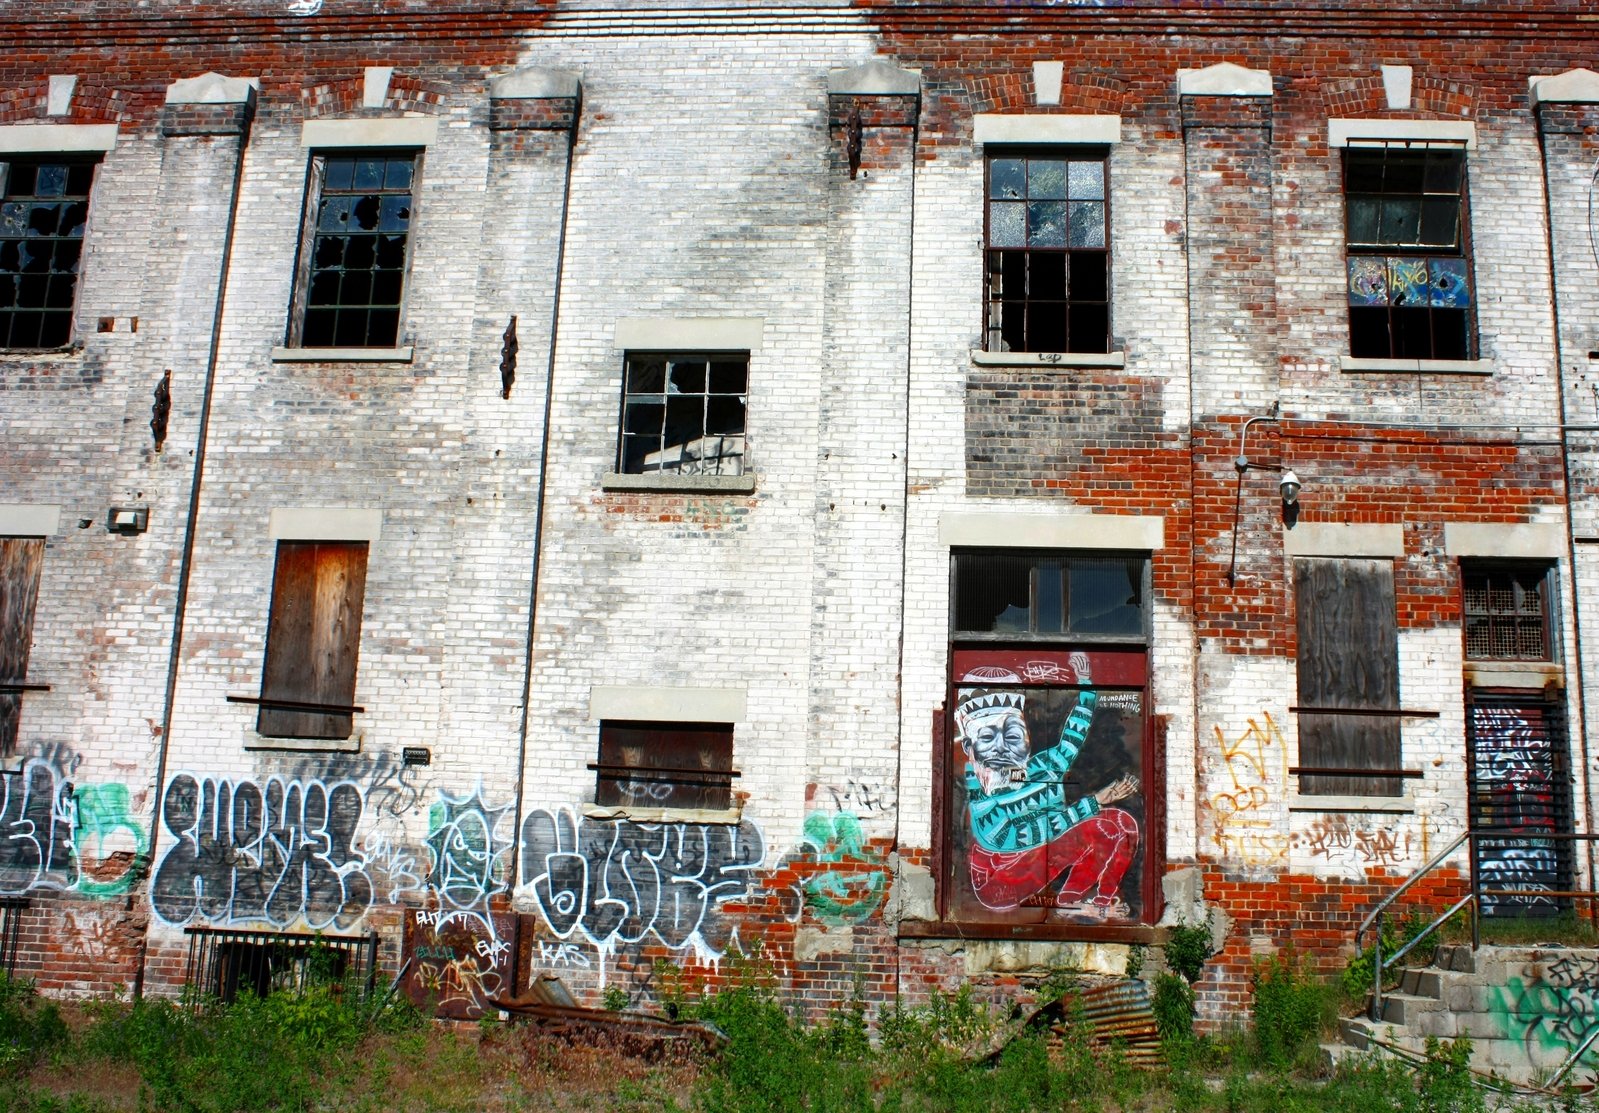 the buildings are boarded up and decorated with graffiti